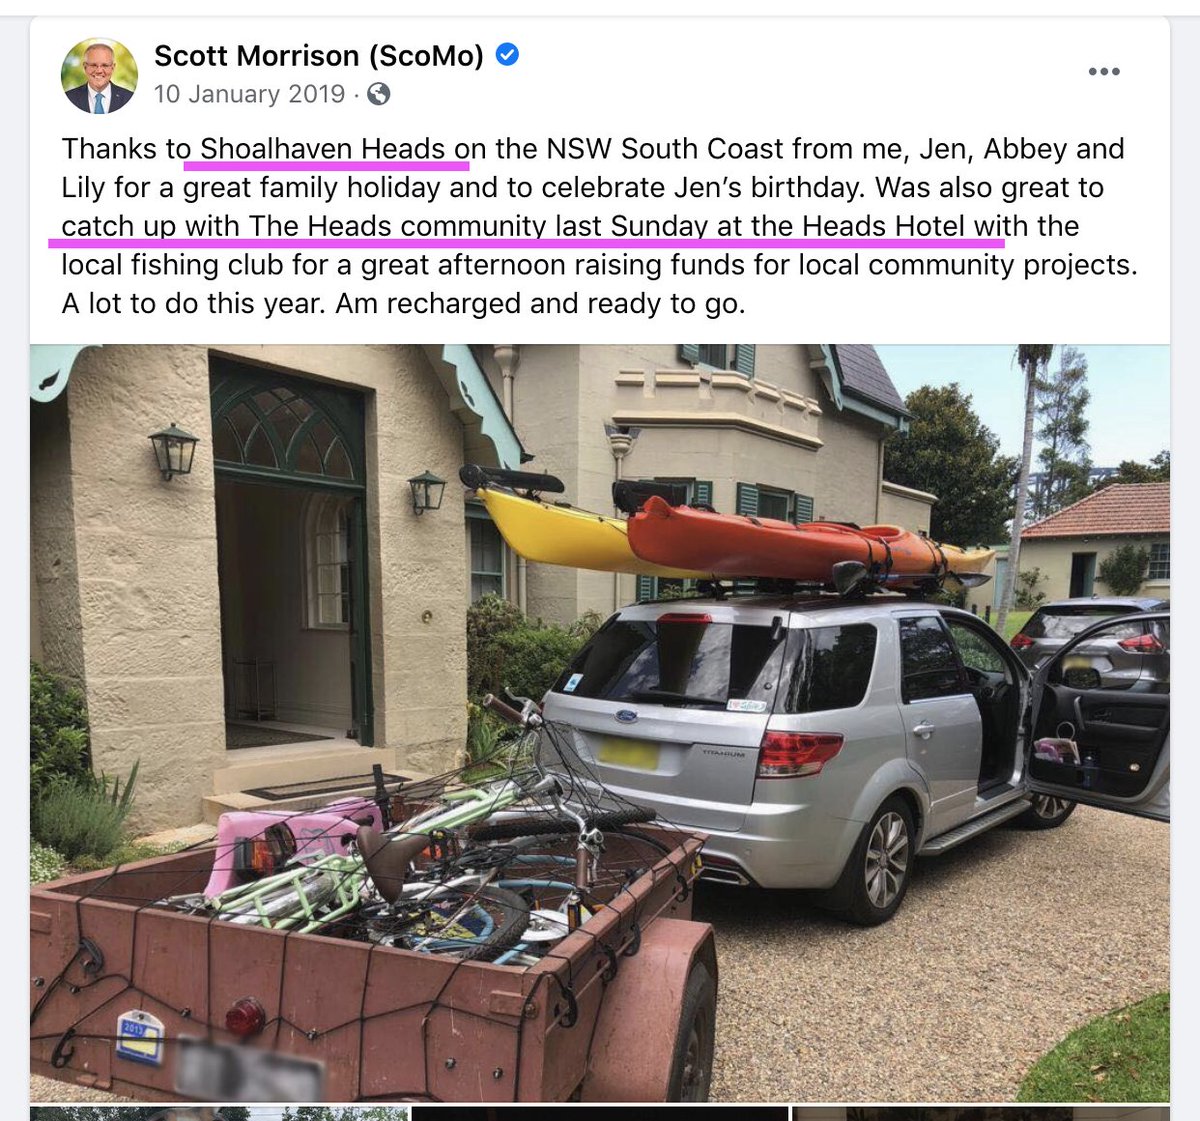 I say yet again, because Scott Morrison seems to find himself speaking of the Shoalhaven Heads Hotel . . .a lot.Here he is back in 2019, complete with a staged "family car" borrowed for the occasion because we all know the PM of Australia is ferried around in a, ah, Ford SUV.